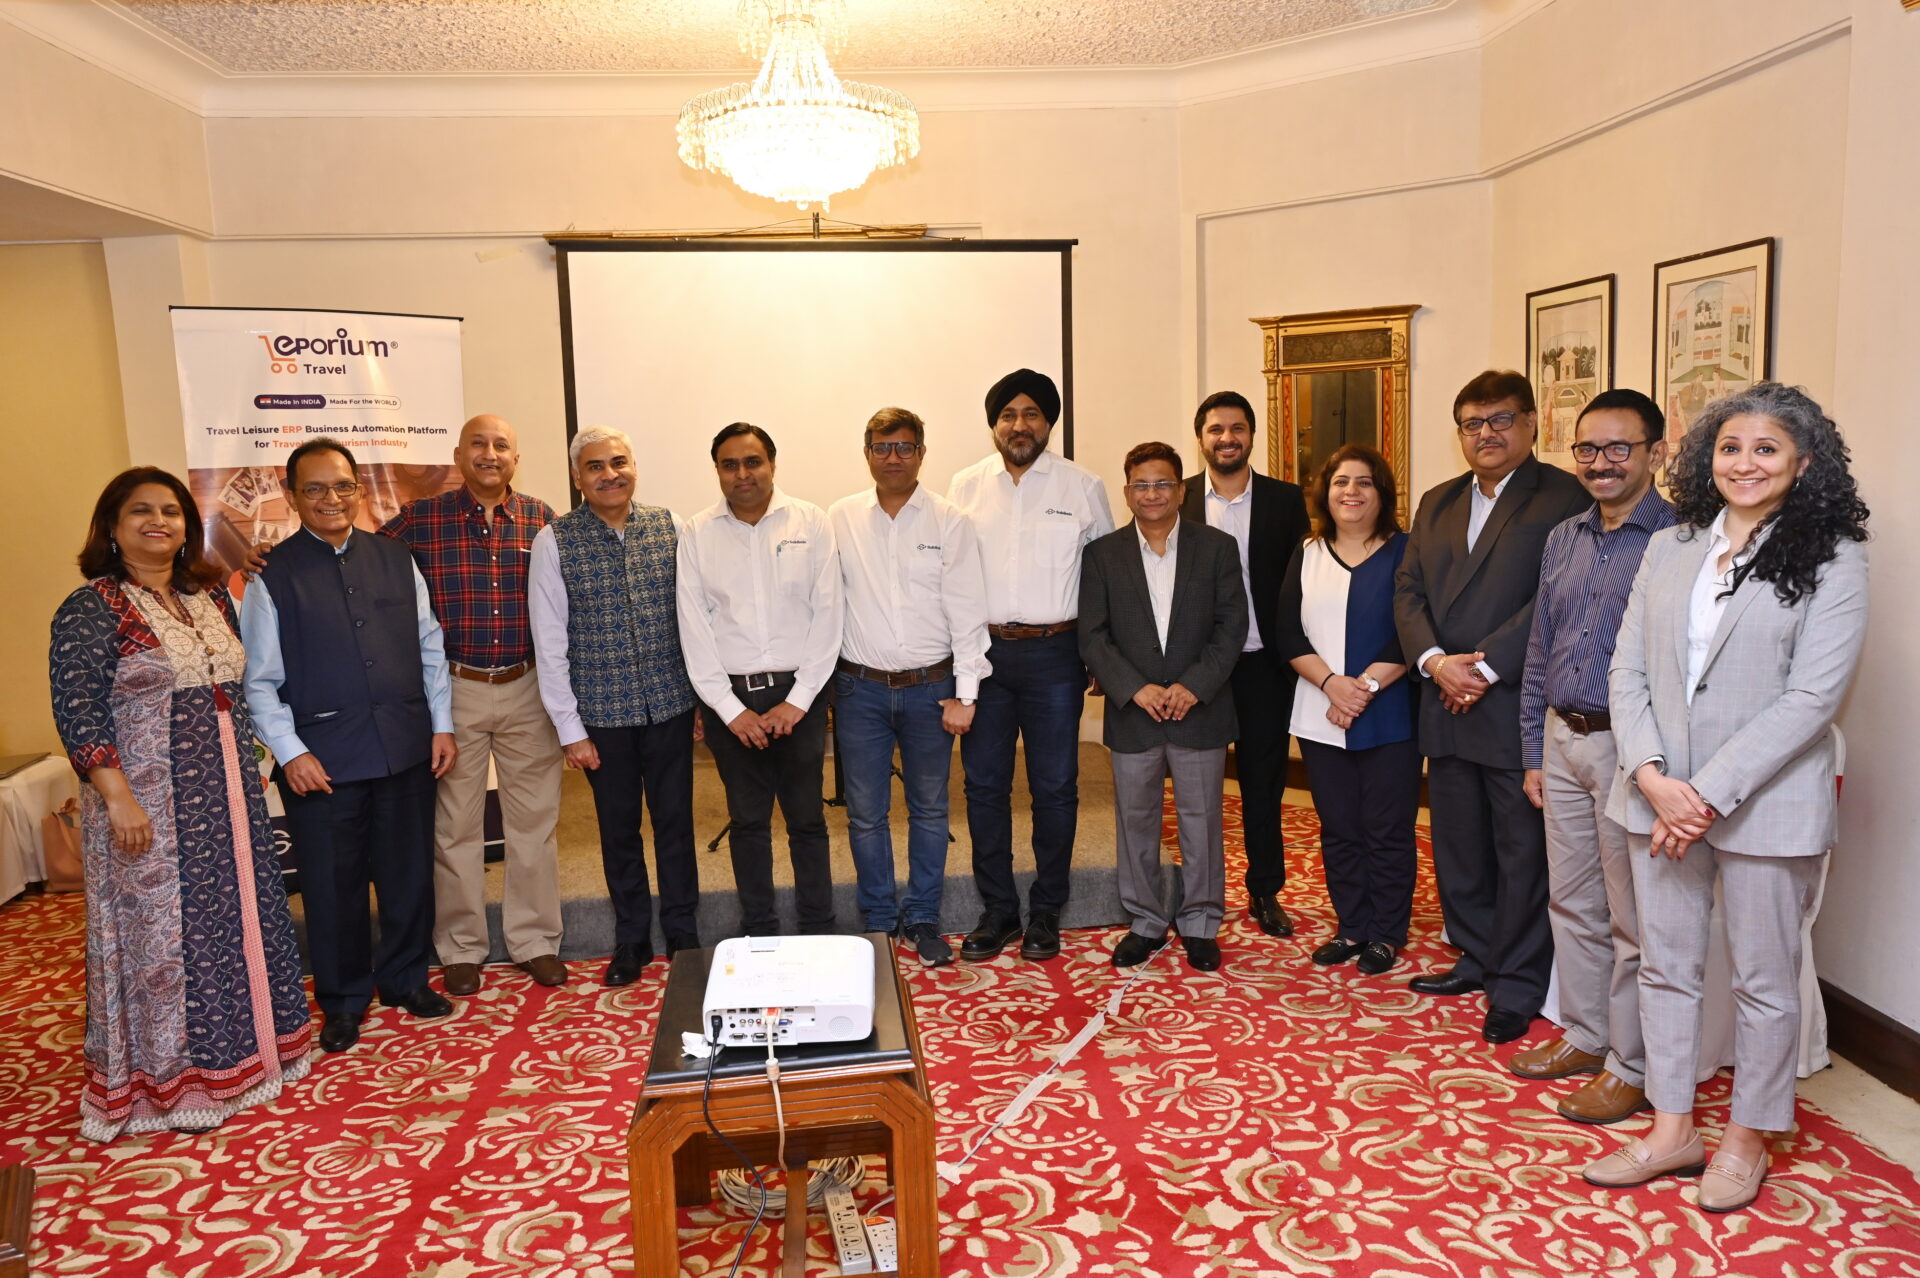 ETAA organised a knowledge session for its members in Mumbai